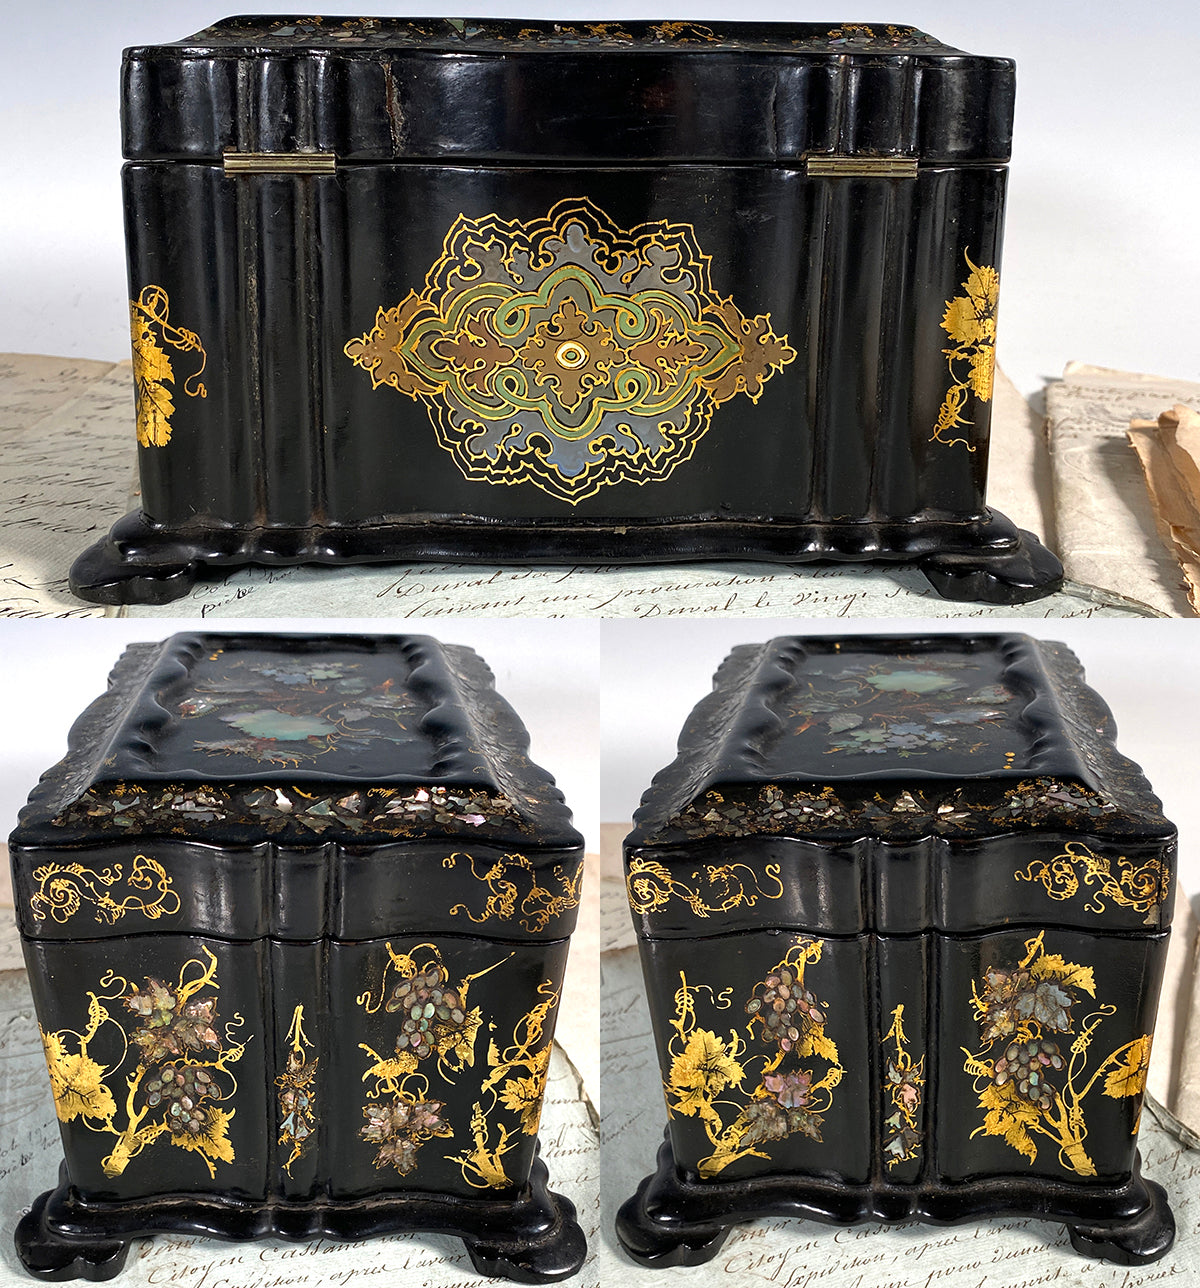 Fine Antique English Victorian Papier Mache and Mother of Pearl Double Well Tea Caddy, c.1850